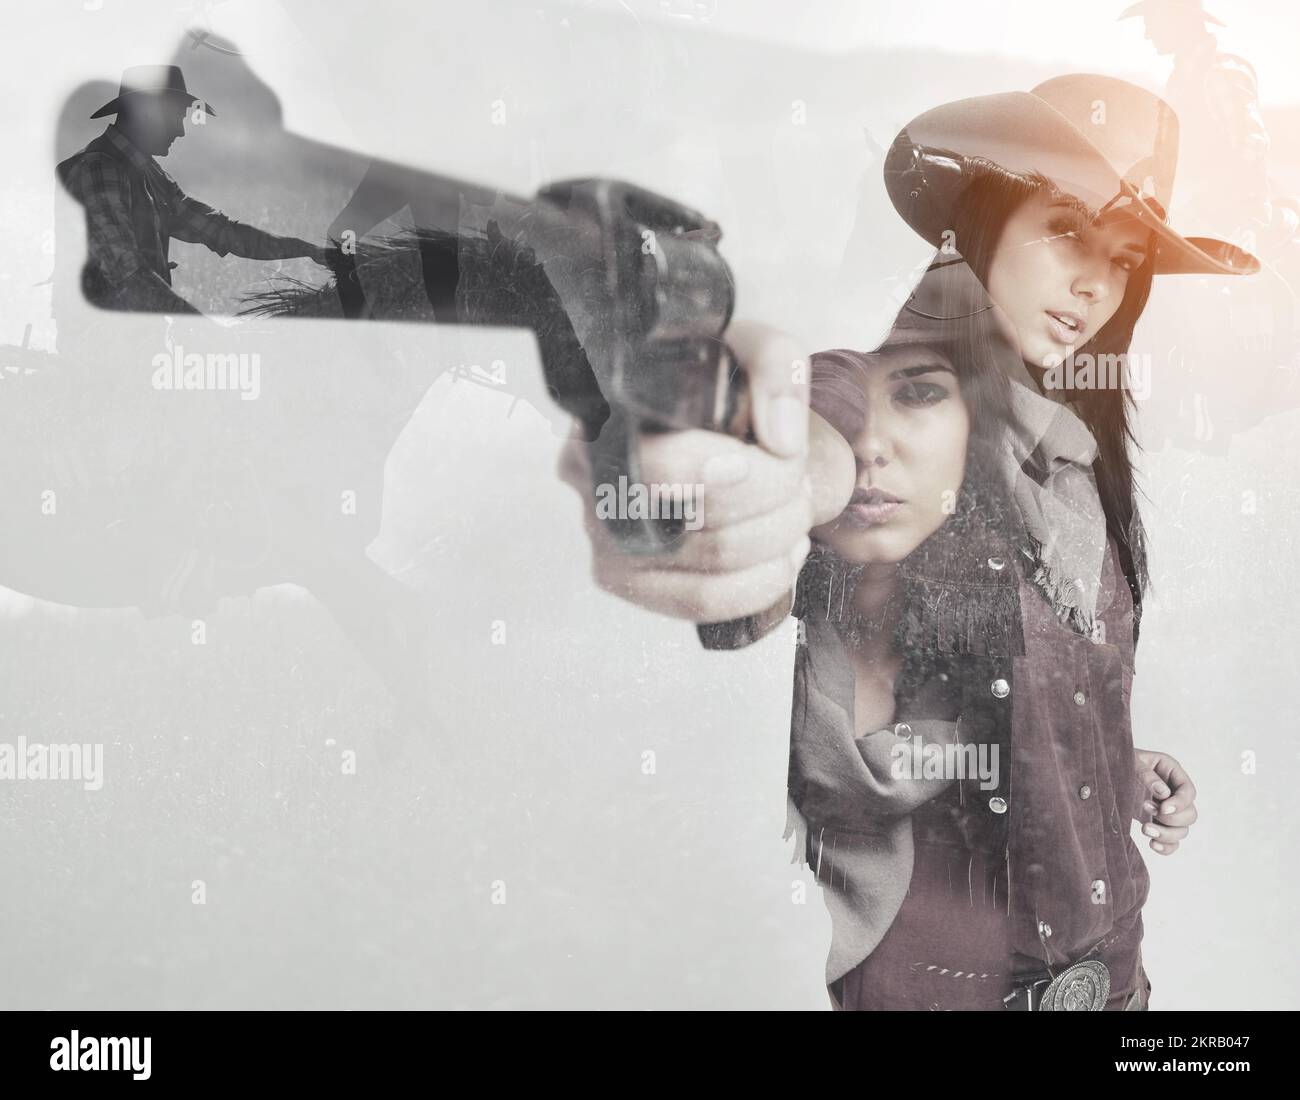 Call me maam one more time. Multiple exposure portrait of a cowgirl aiming her pistol superimposed over a western background. Stock Photo